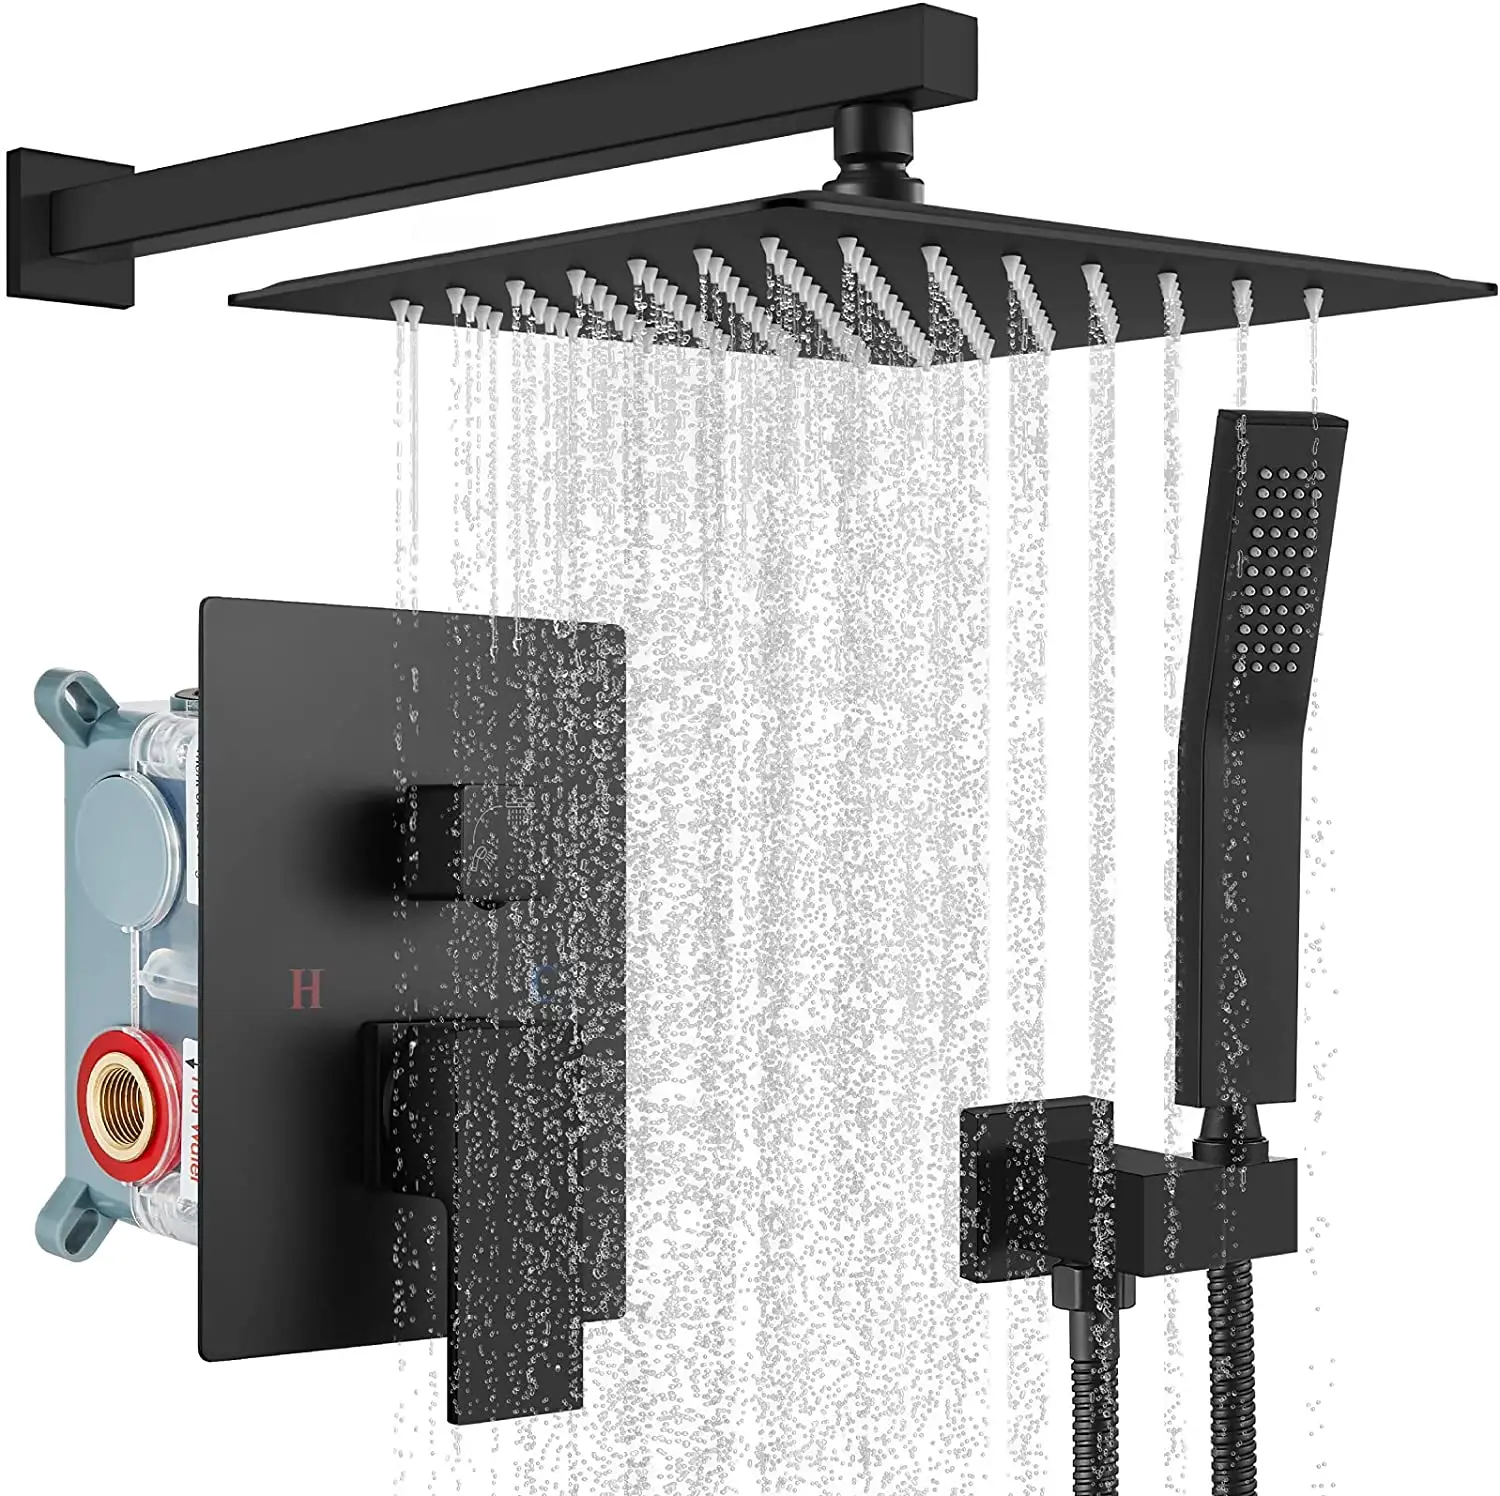 Matte Black Shower System with 10 inch Square Shower Head Combo Bathroom Rain Mixer Wall Mounted Shower tap set